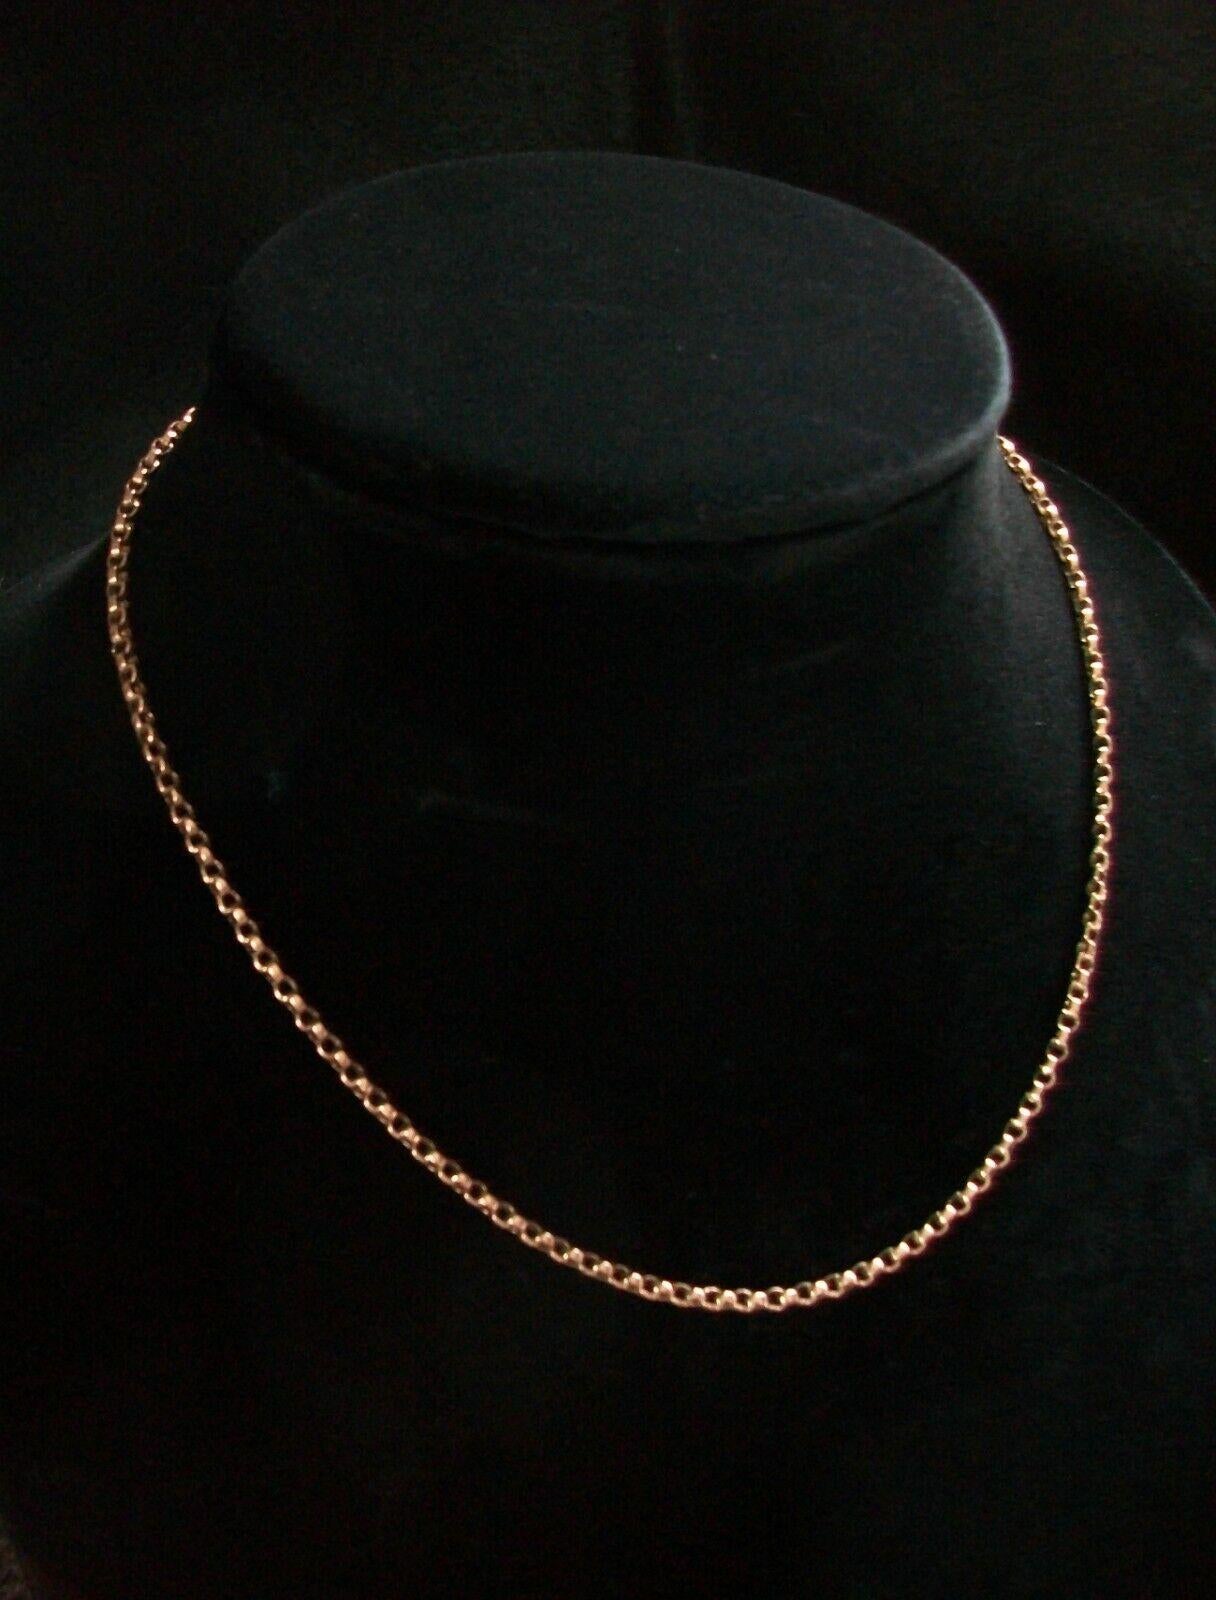 CHARLES KELLER & CO. - Antique 10K rose gold belcher chain necklace (also called rolo chain) - hand made - finest quality American workmanship and detail - unique hand made clasp - 10K hallmarks to the clasp and stretcher of ring - maker's mark 'K'